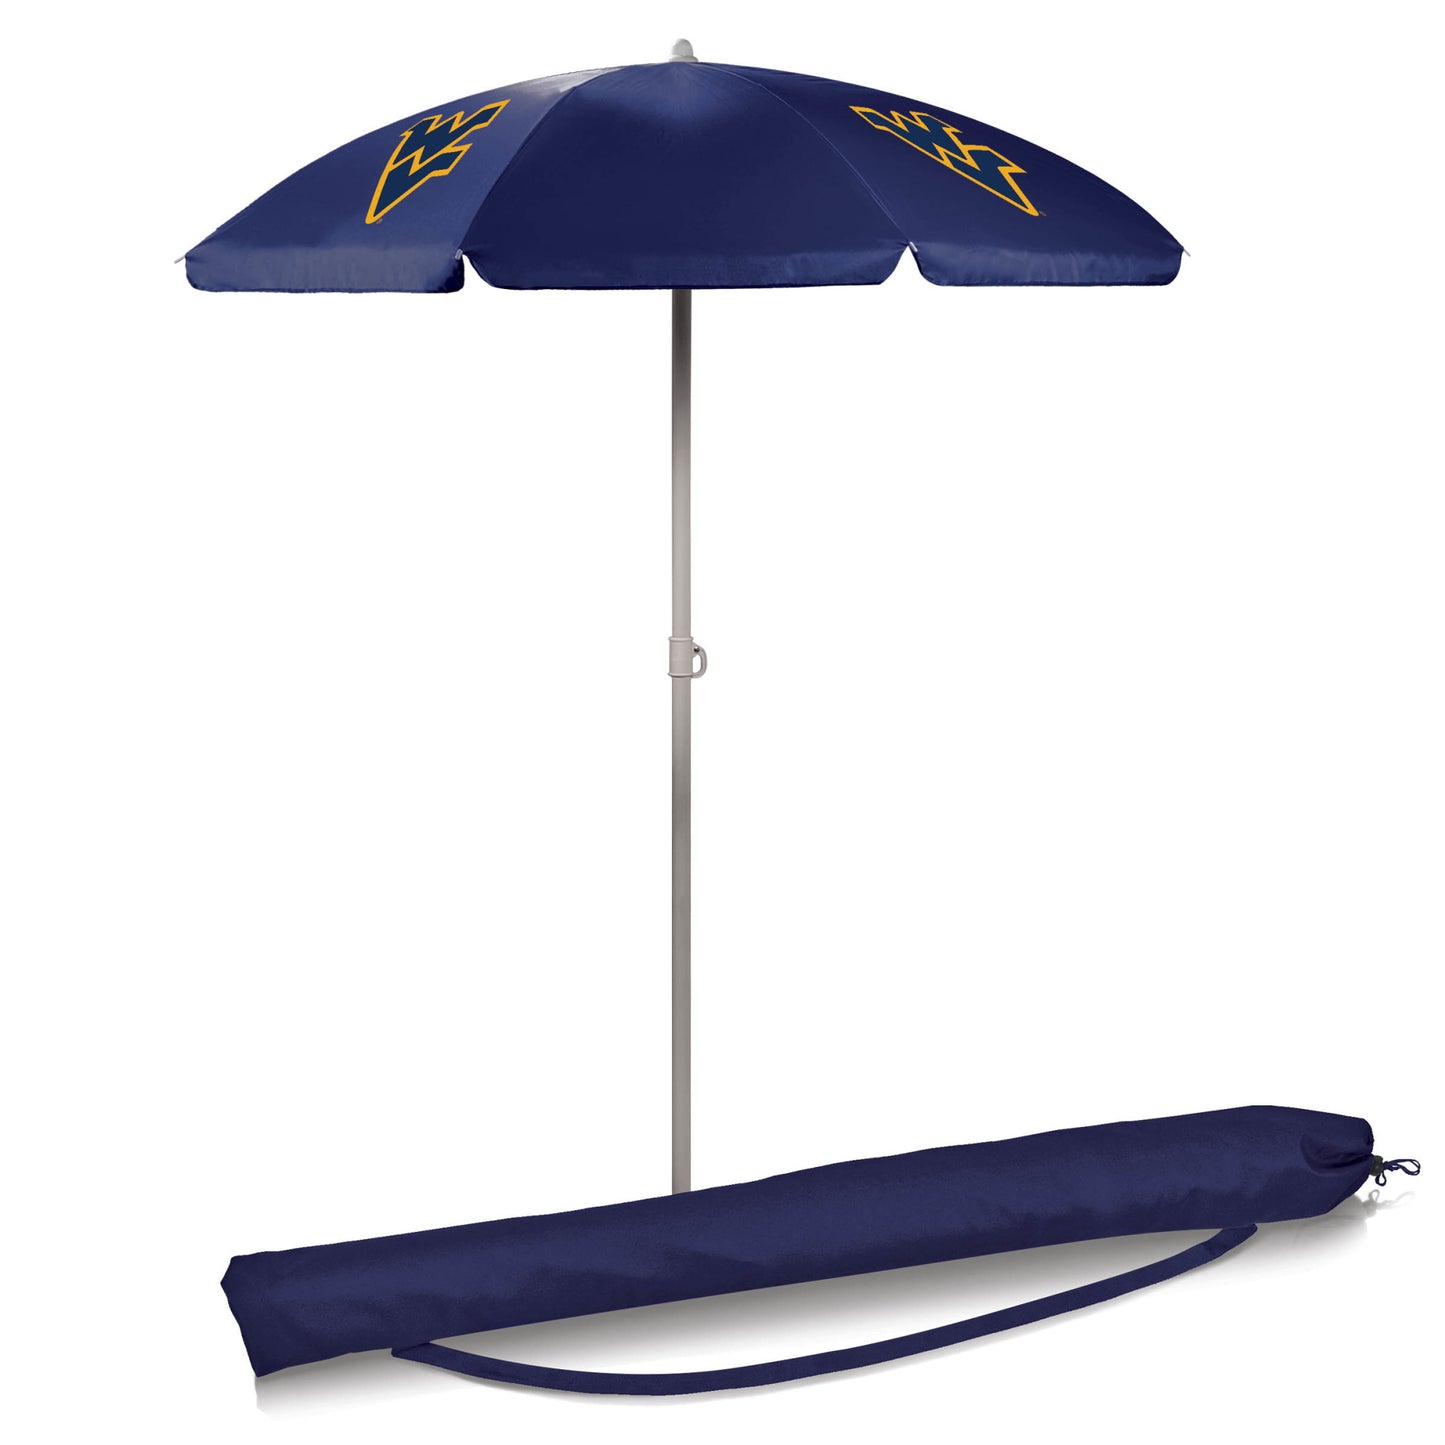 West Virginia Mountaineers 5.5' Portable Beach Umbrella by Picnic Time